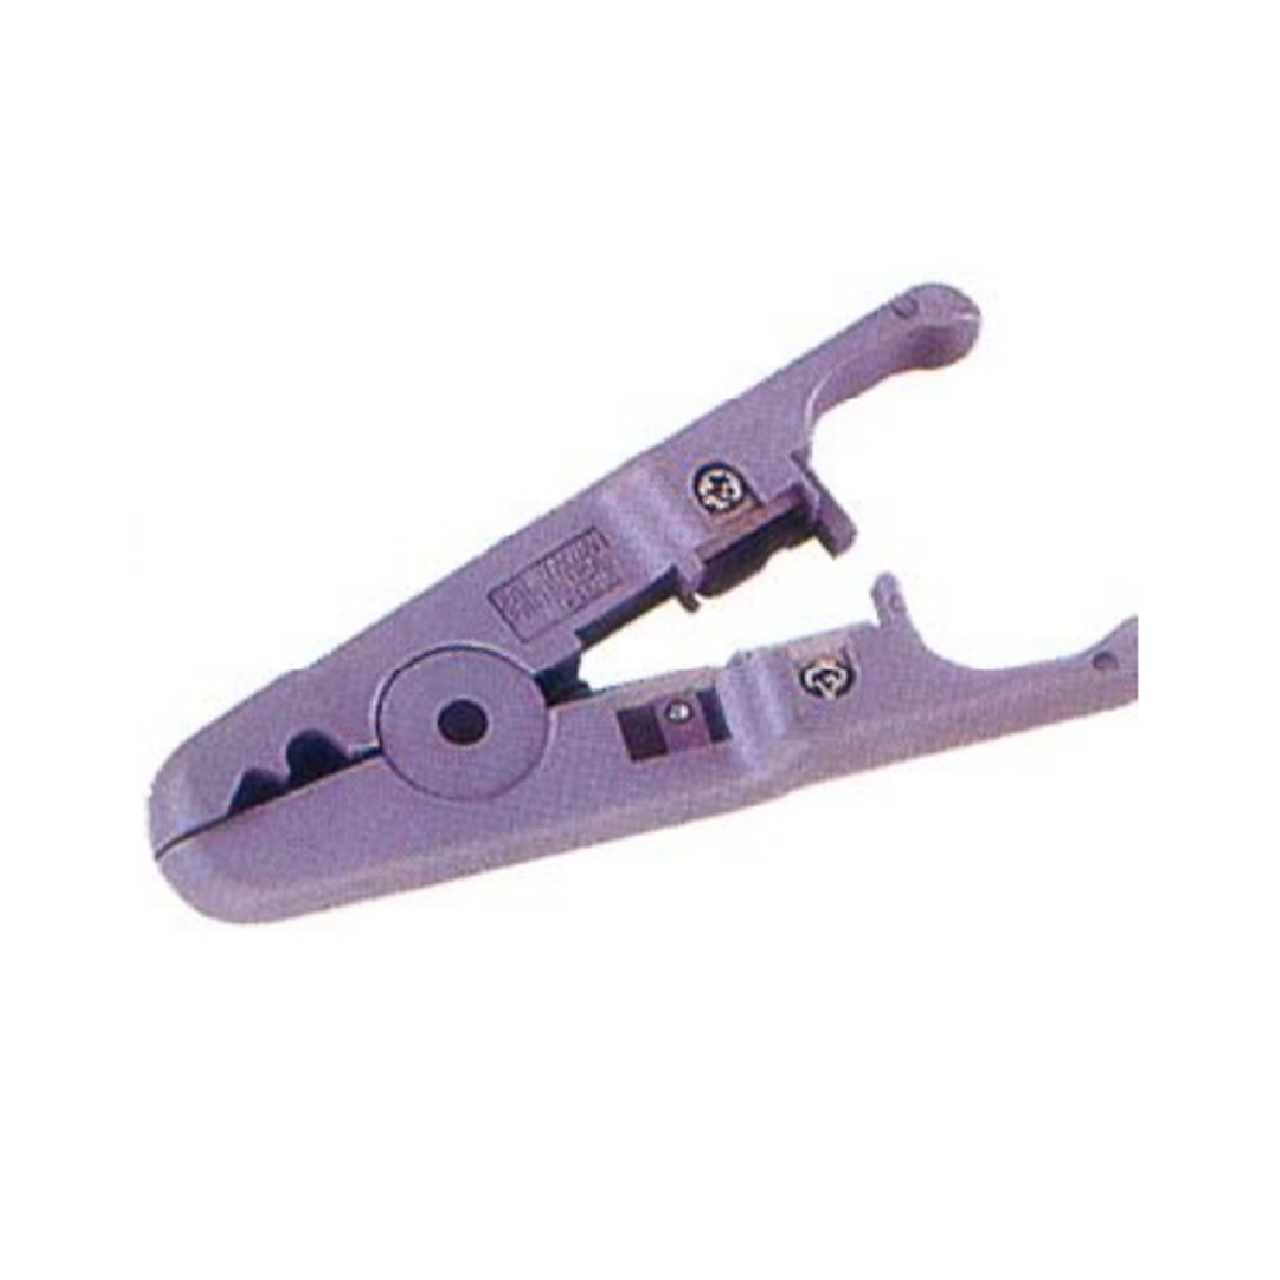 OPT LY501, 4"/100MM UNIVERSAL Stripping Tool